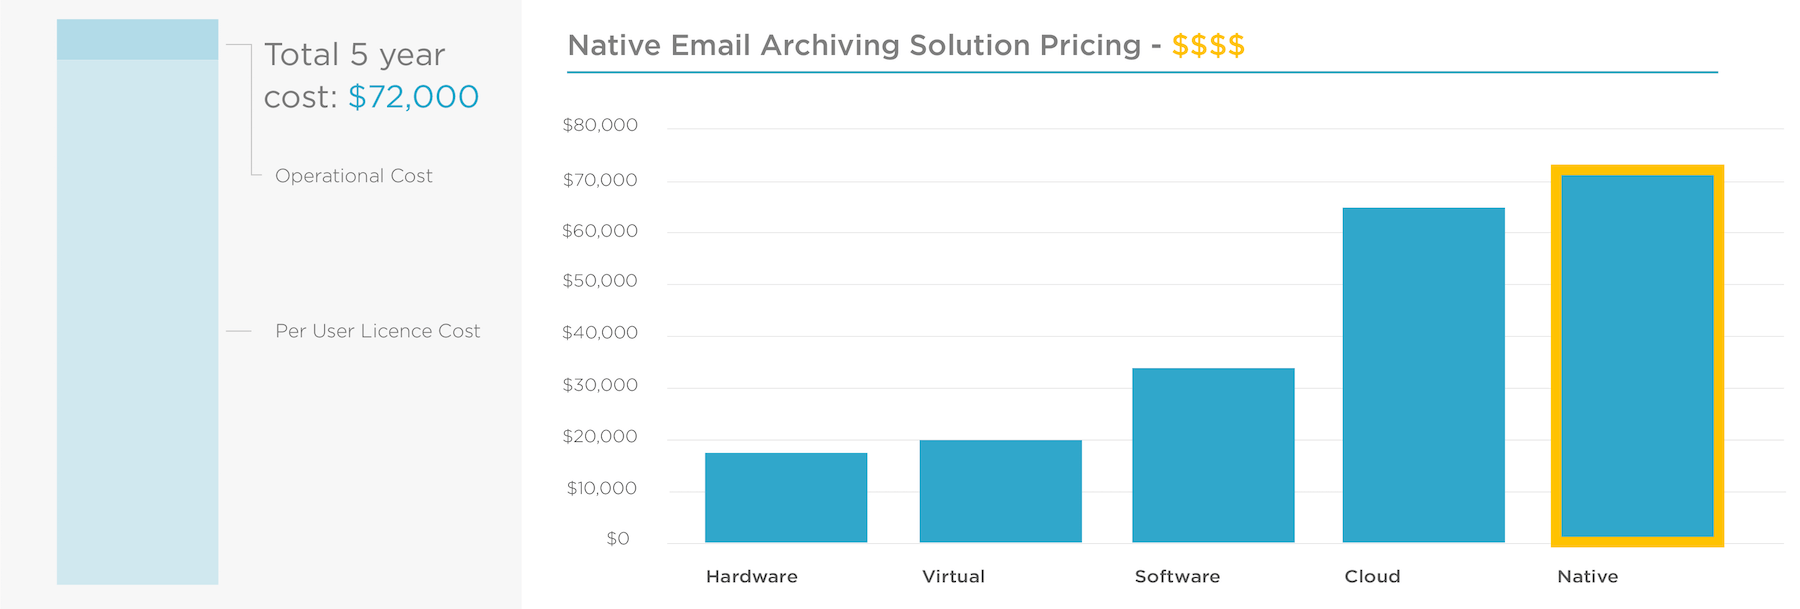 Native Email Archiving Solution Pricing